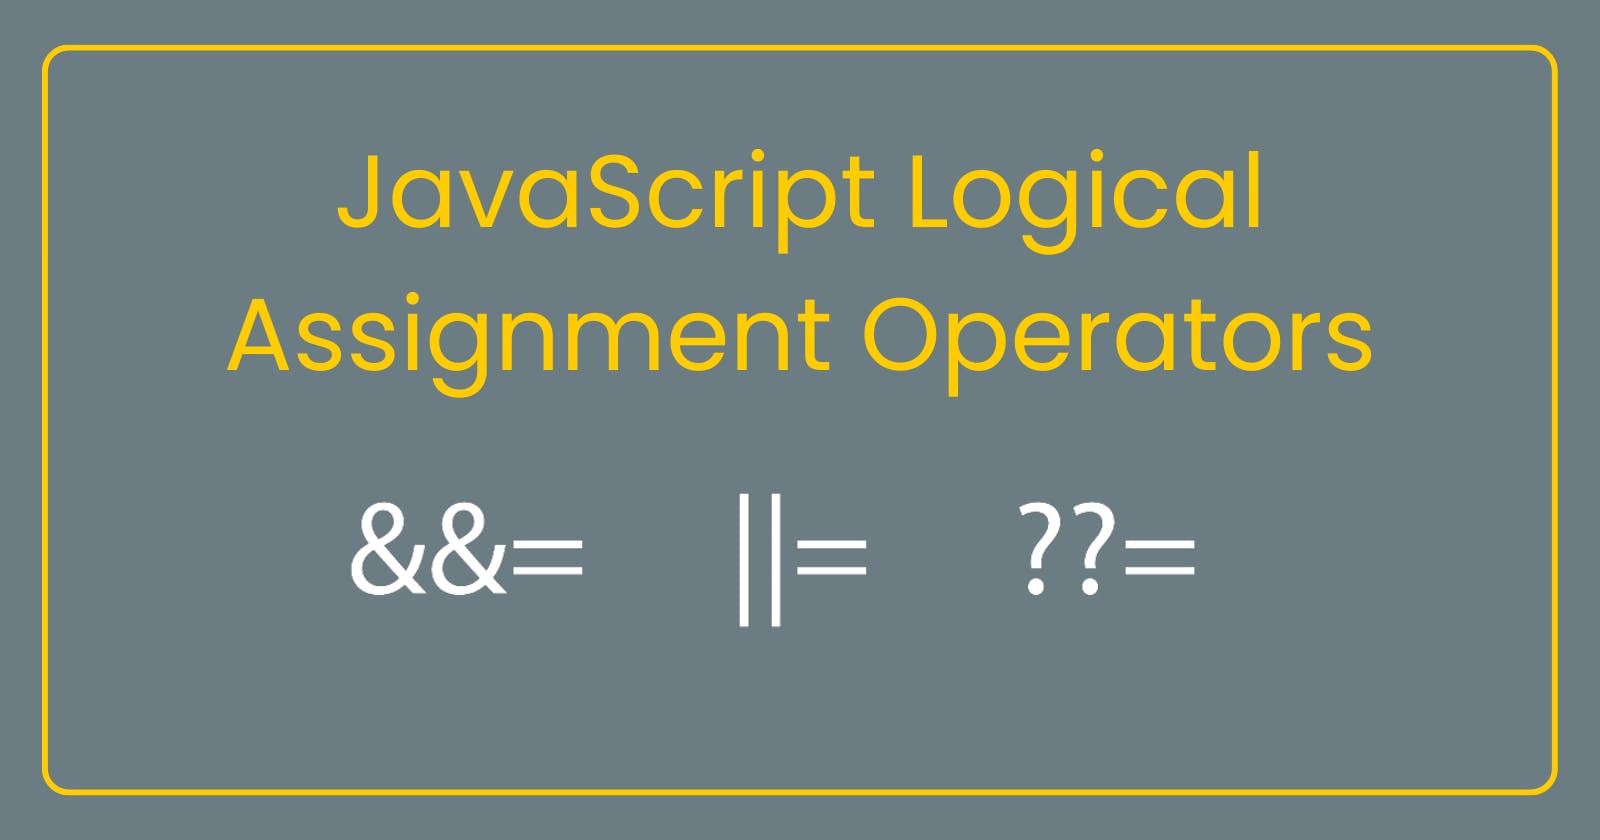 About JavaScript Logical Assignments